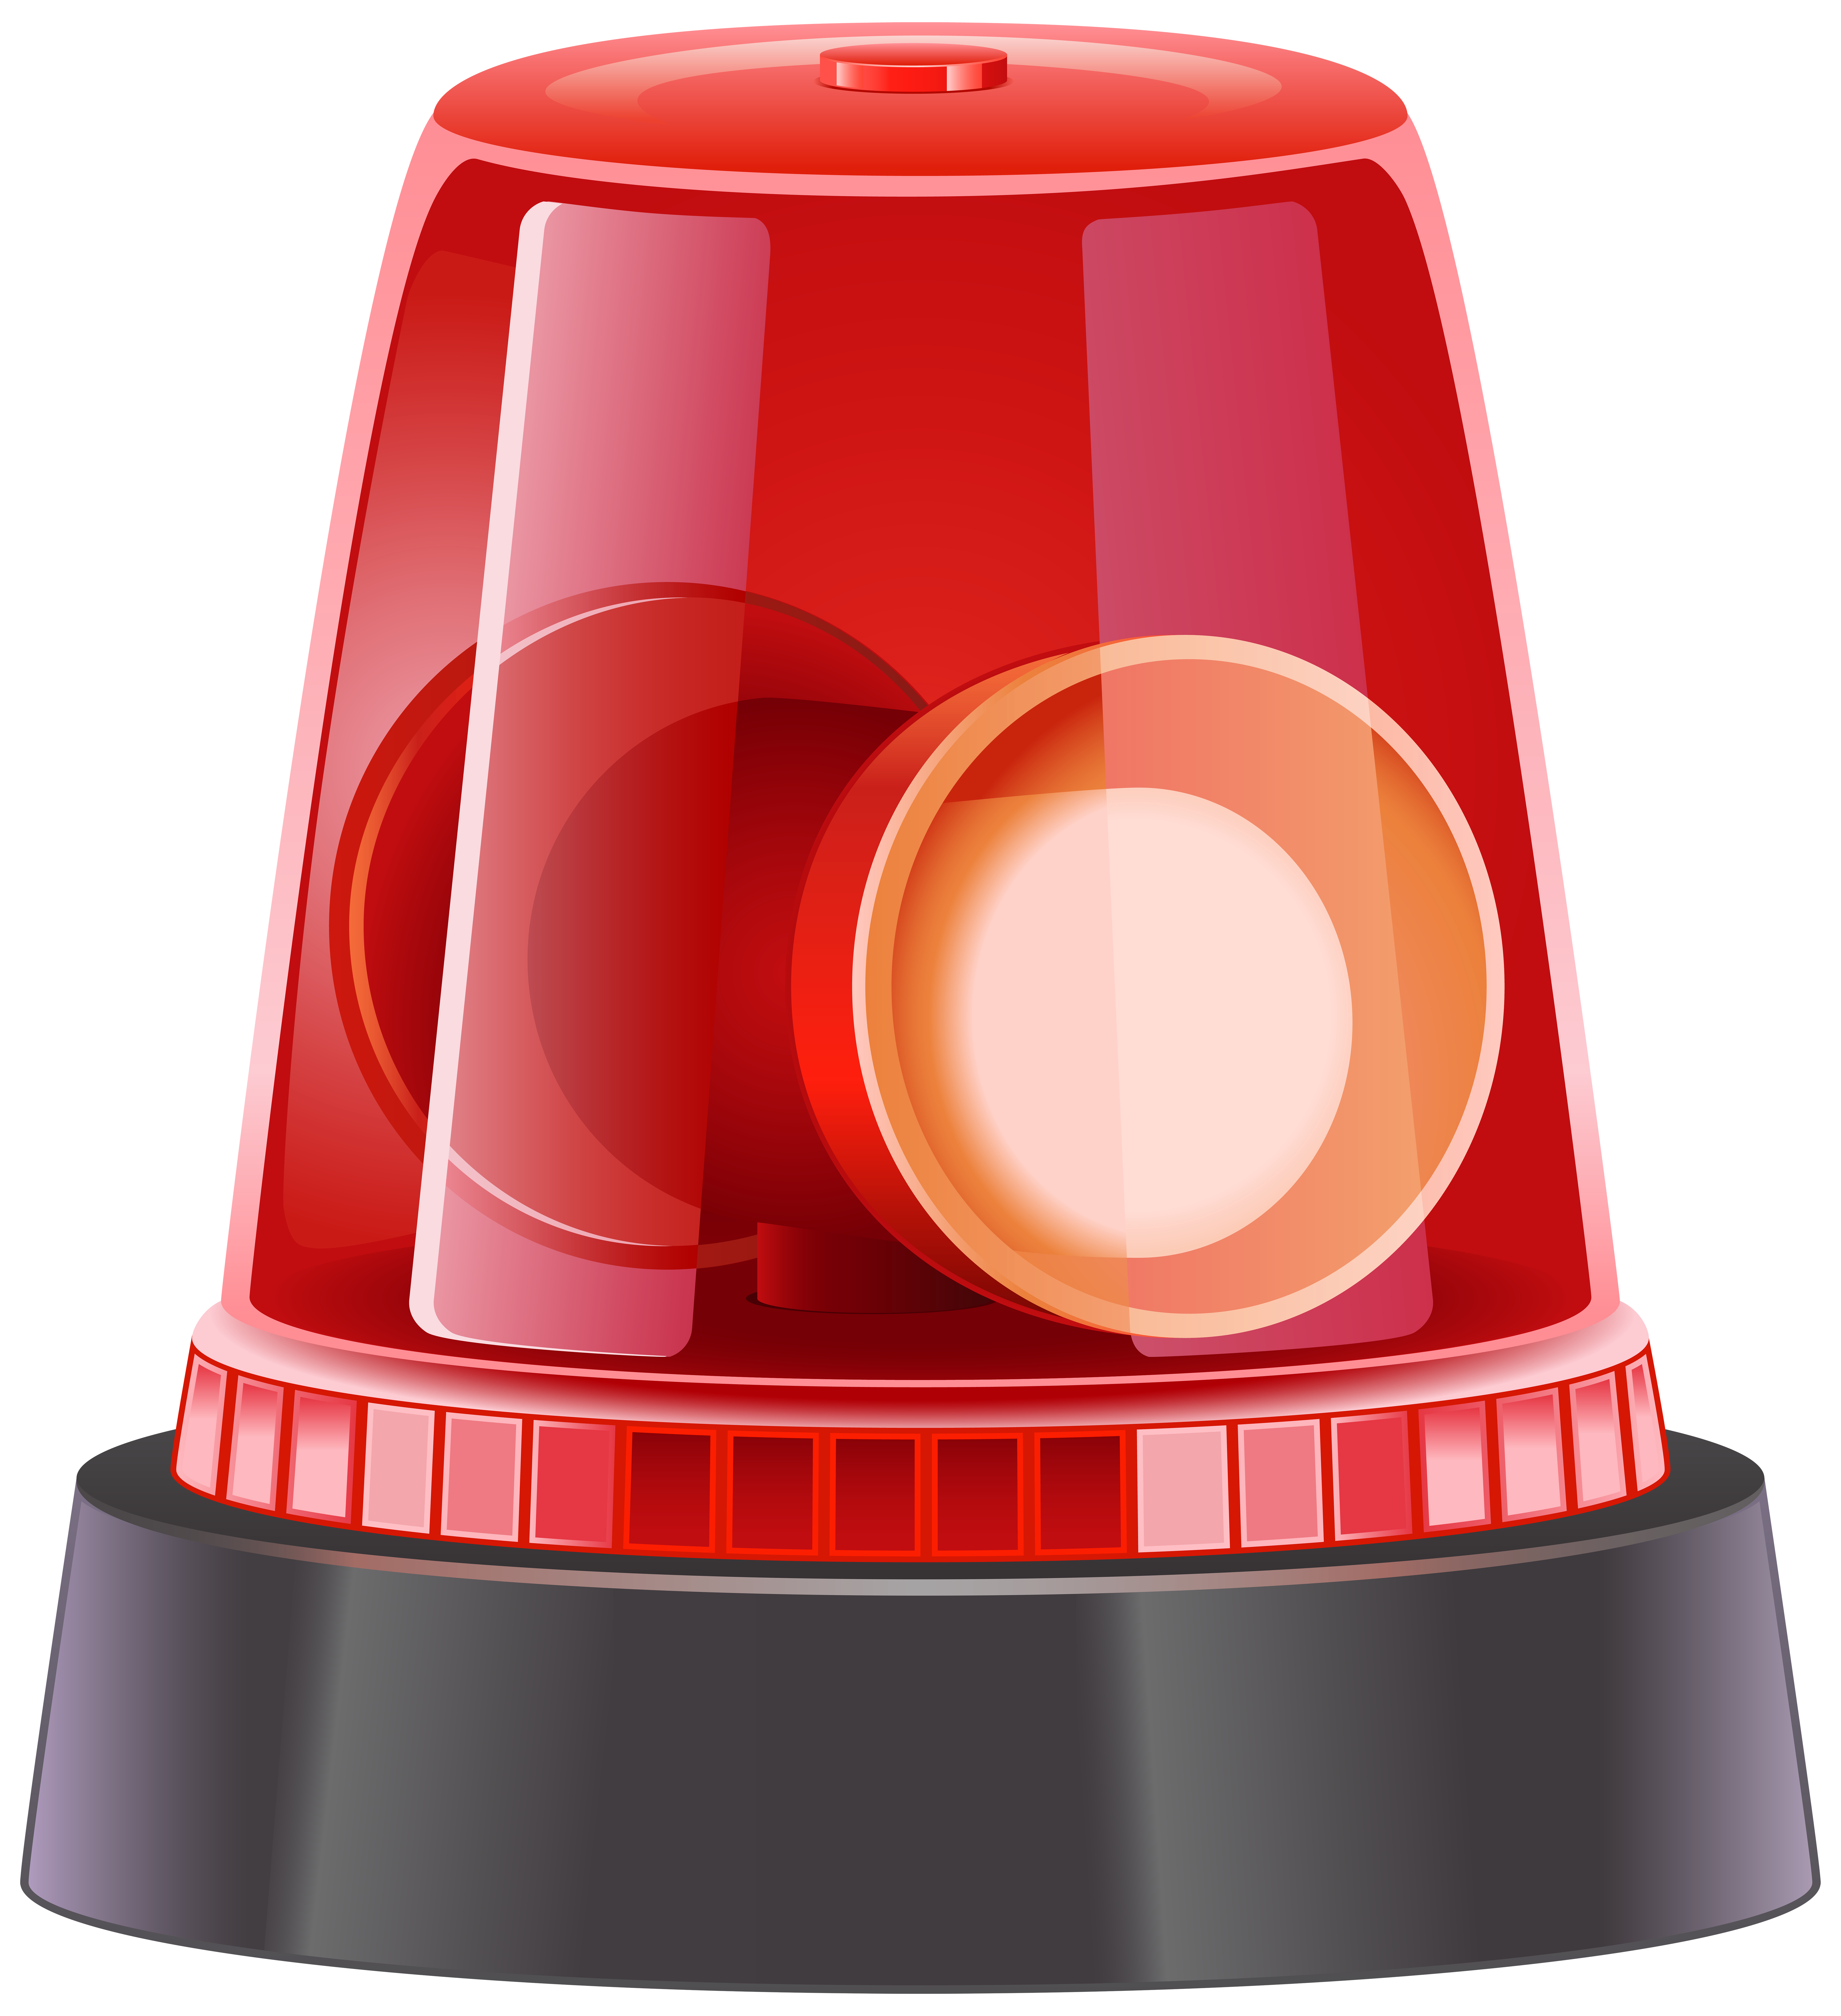 Siren Police Red HQ Image Free PNG Clipart